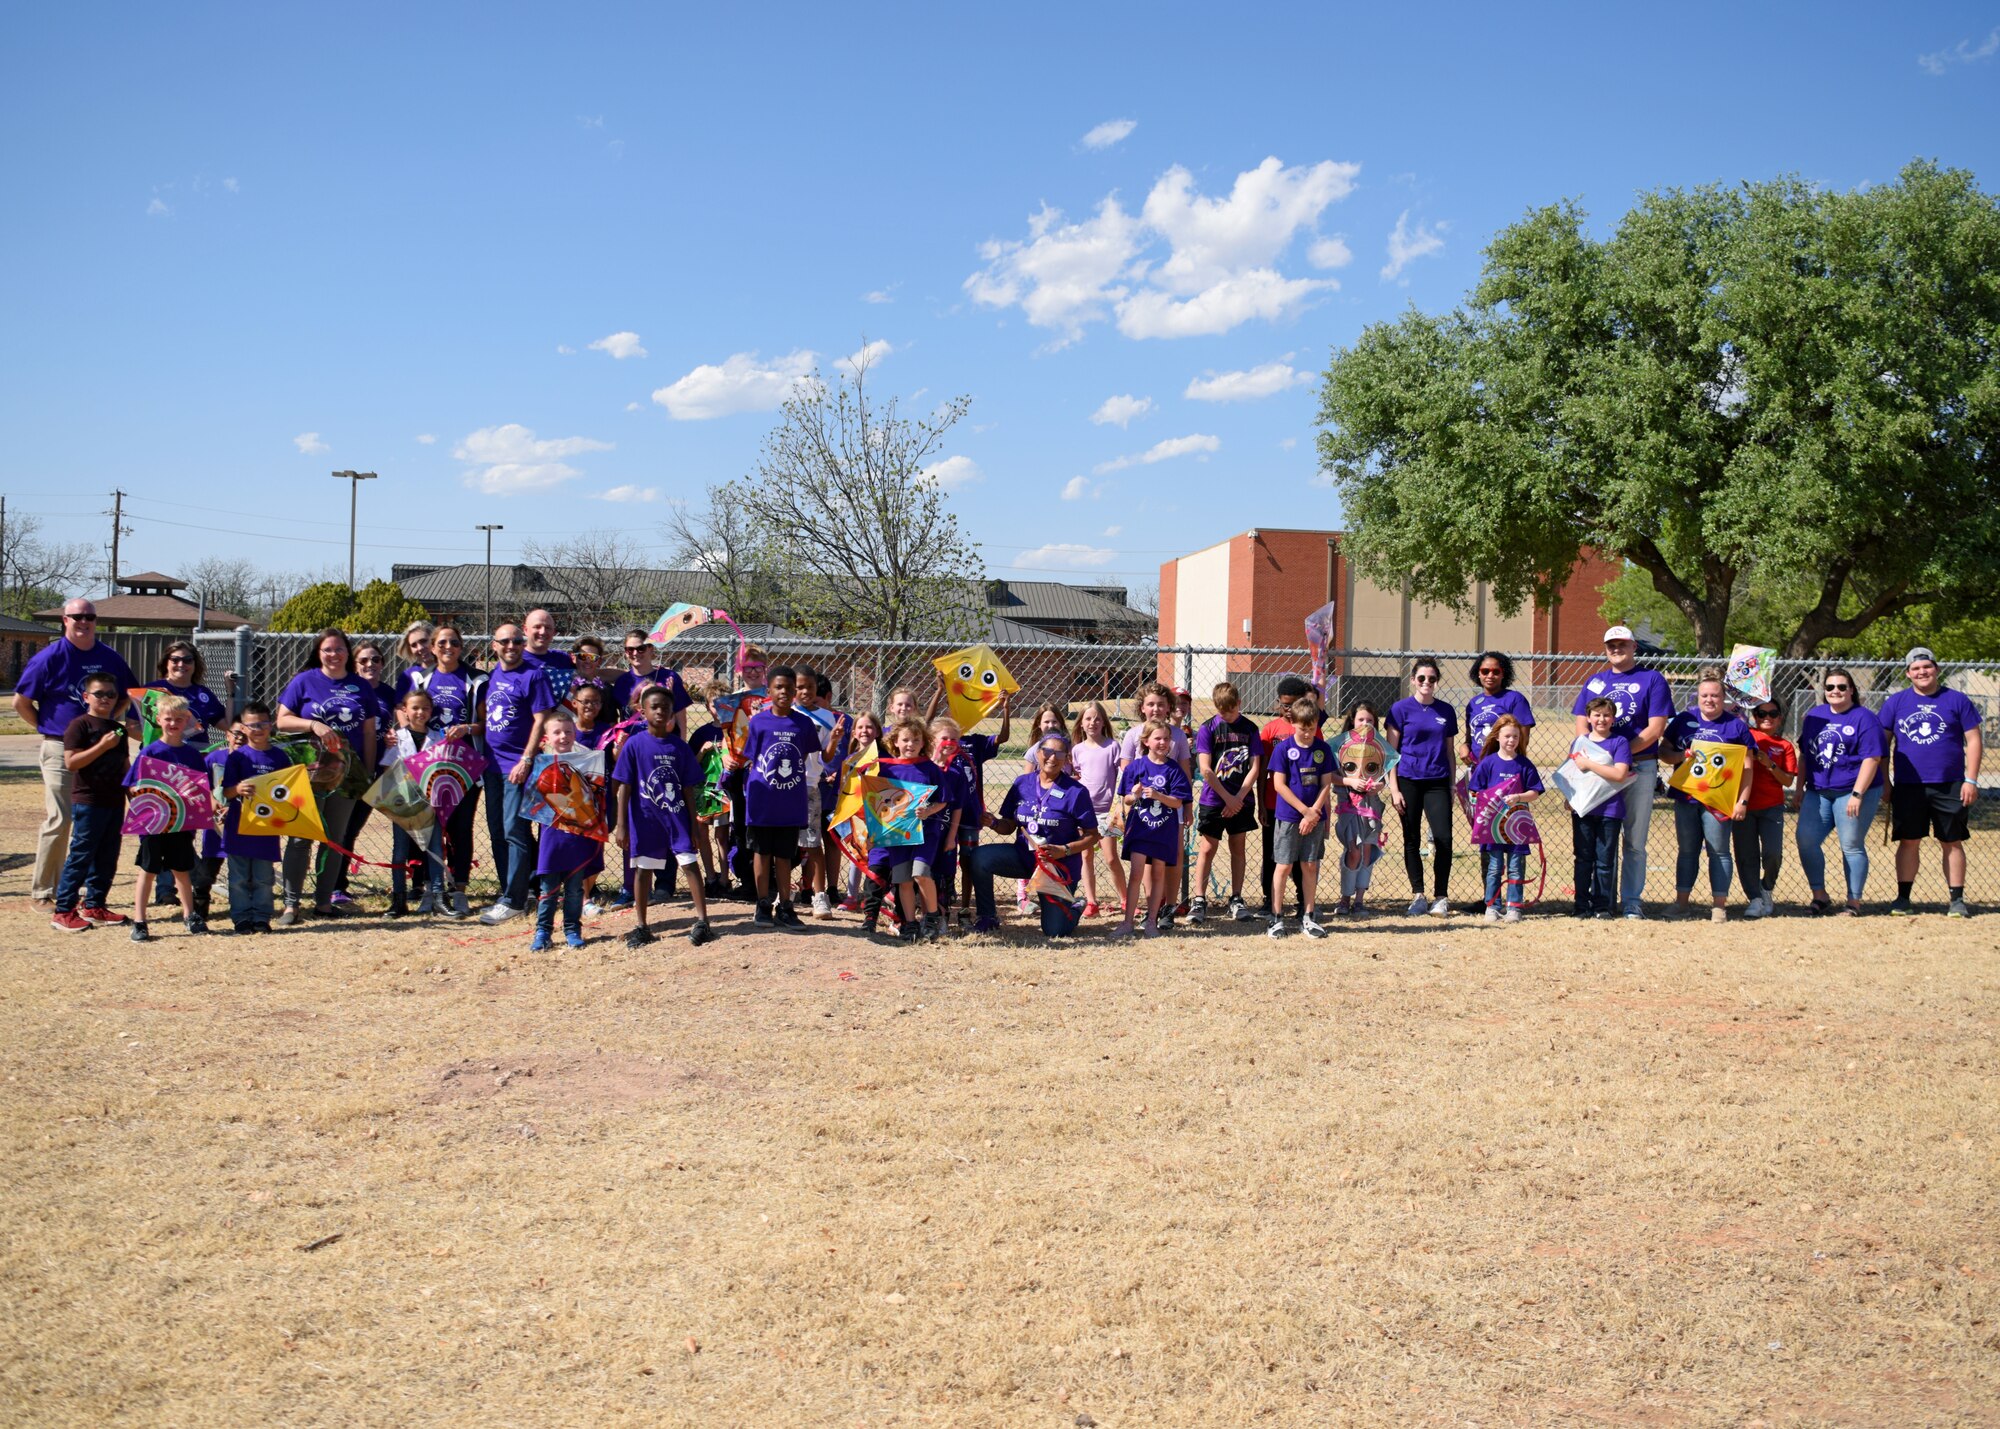 Leadership of the 17th Training Wing, caretakers, parents, students, and children, take a group photo during Purple Up at the School Age Program building, Goodfellow Air Force Base, Texas, April 20, 2022. The wing showed their appreciation to military children by wearing purple for a day and celebrating with various events. (U.S. Air Force photo by Senior Airman Ethan Sherwood)